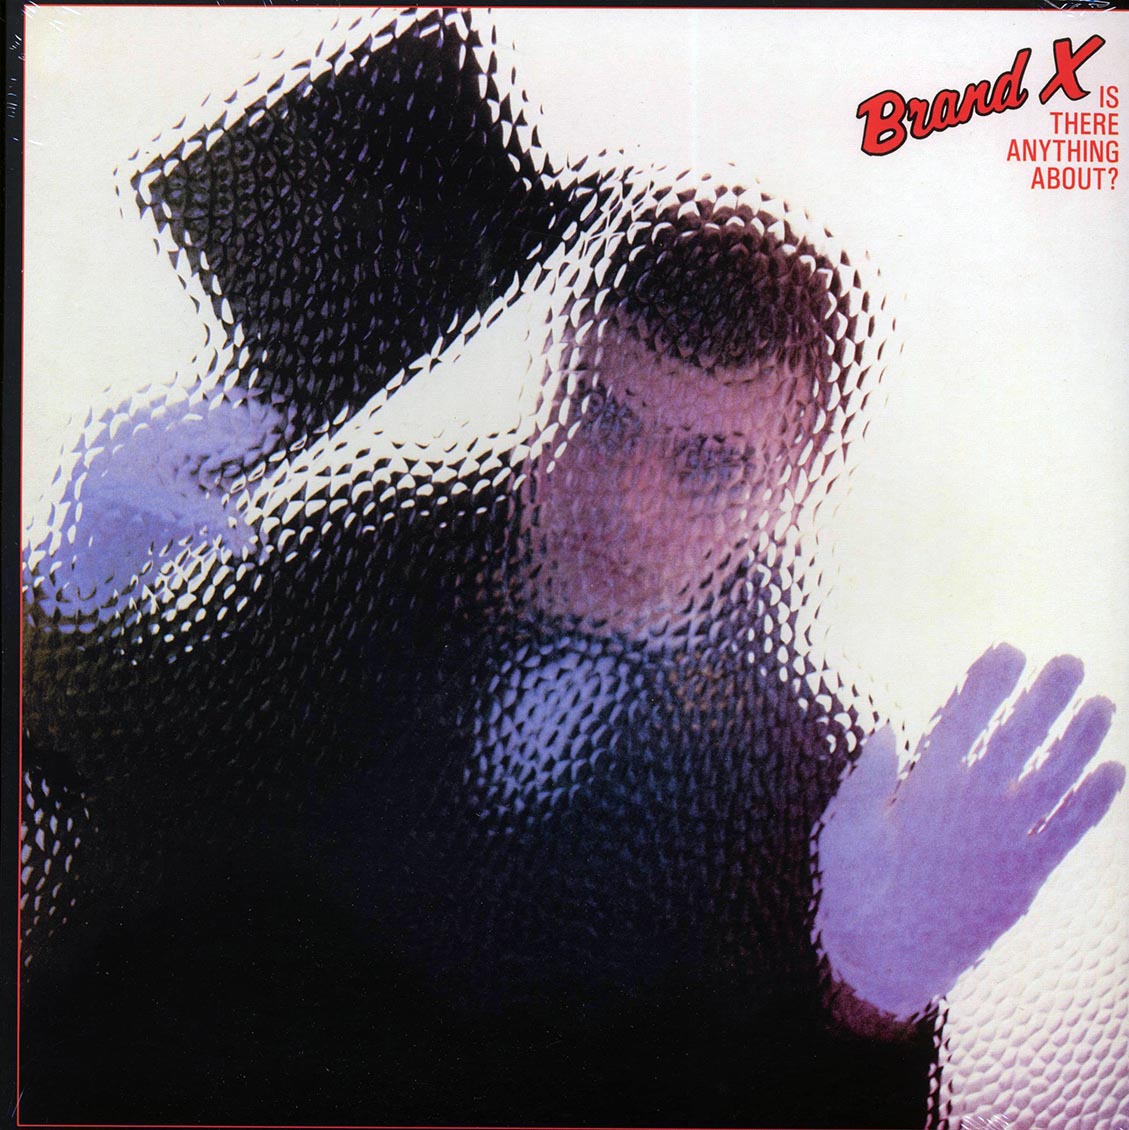 Brand X - Is There Anything About? (ltd. ed.) (4xLP) (box set) - Vinyl LP